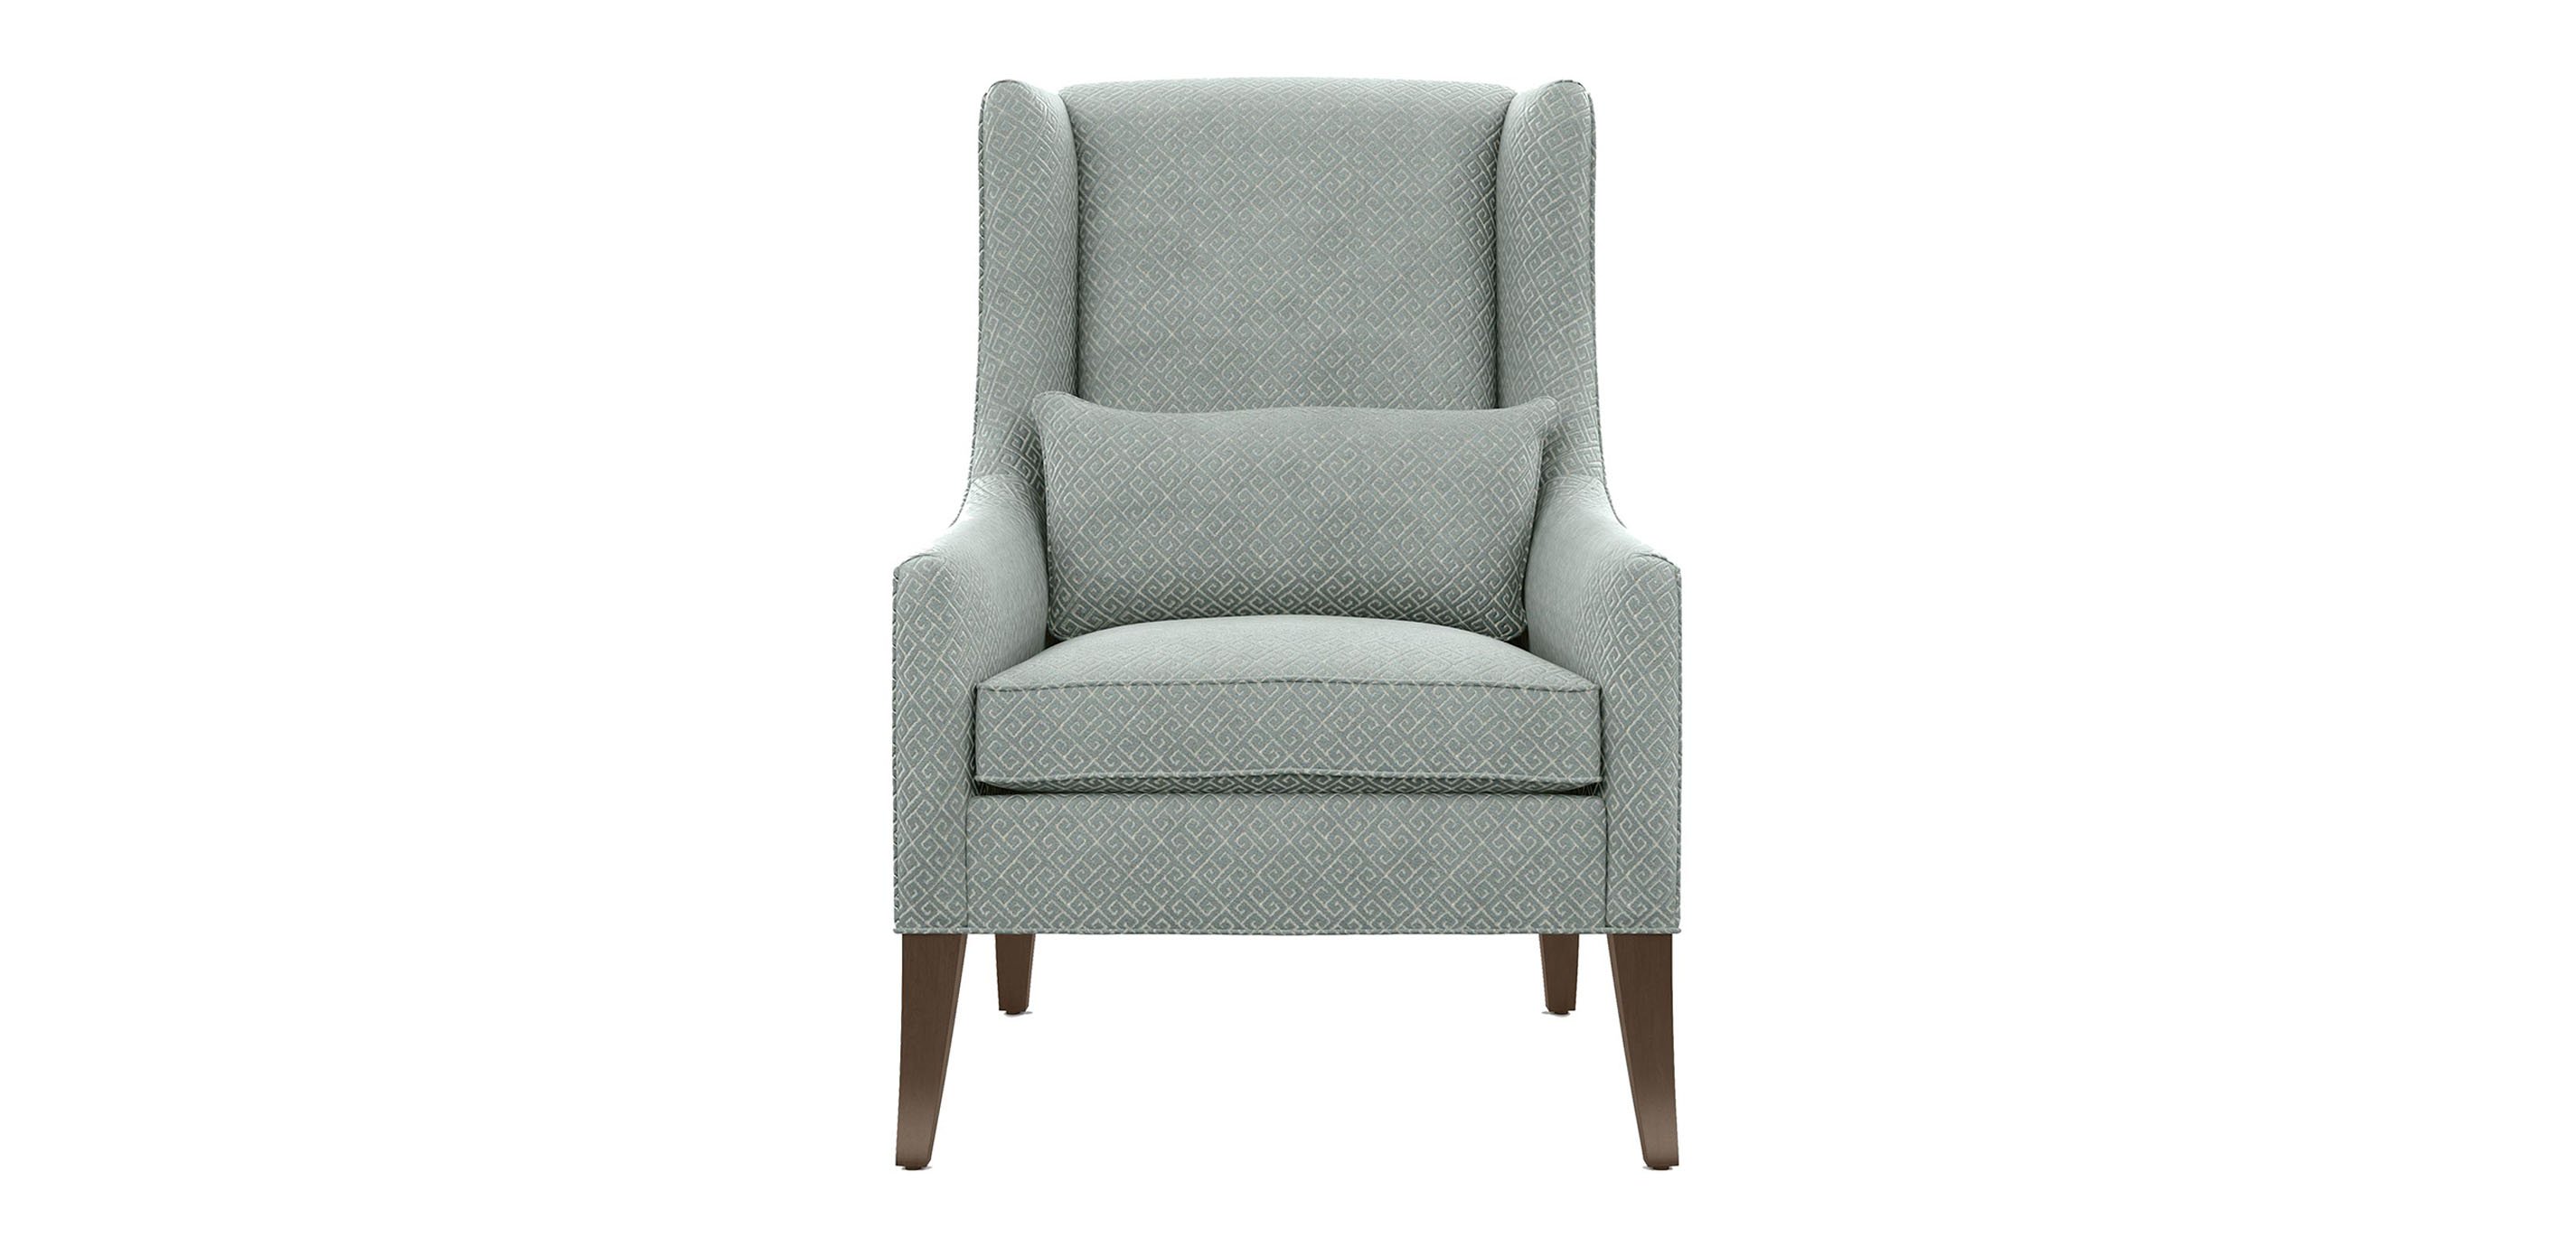 Kyle Wing Chair Chairs Chaises, Ethan Allen Wing Chair Slipcover